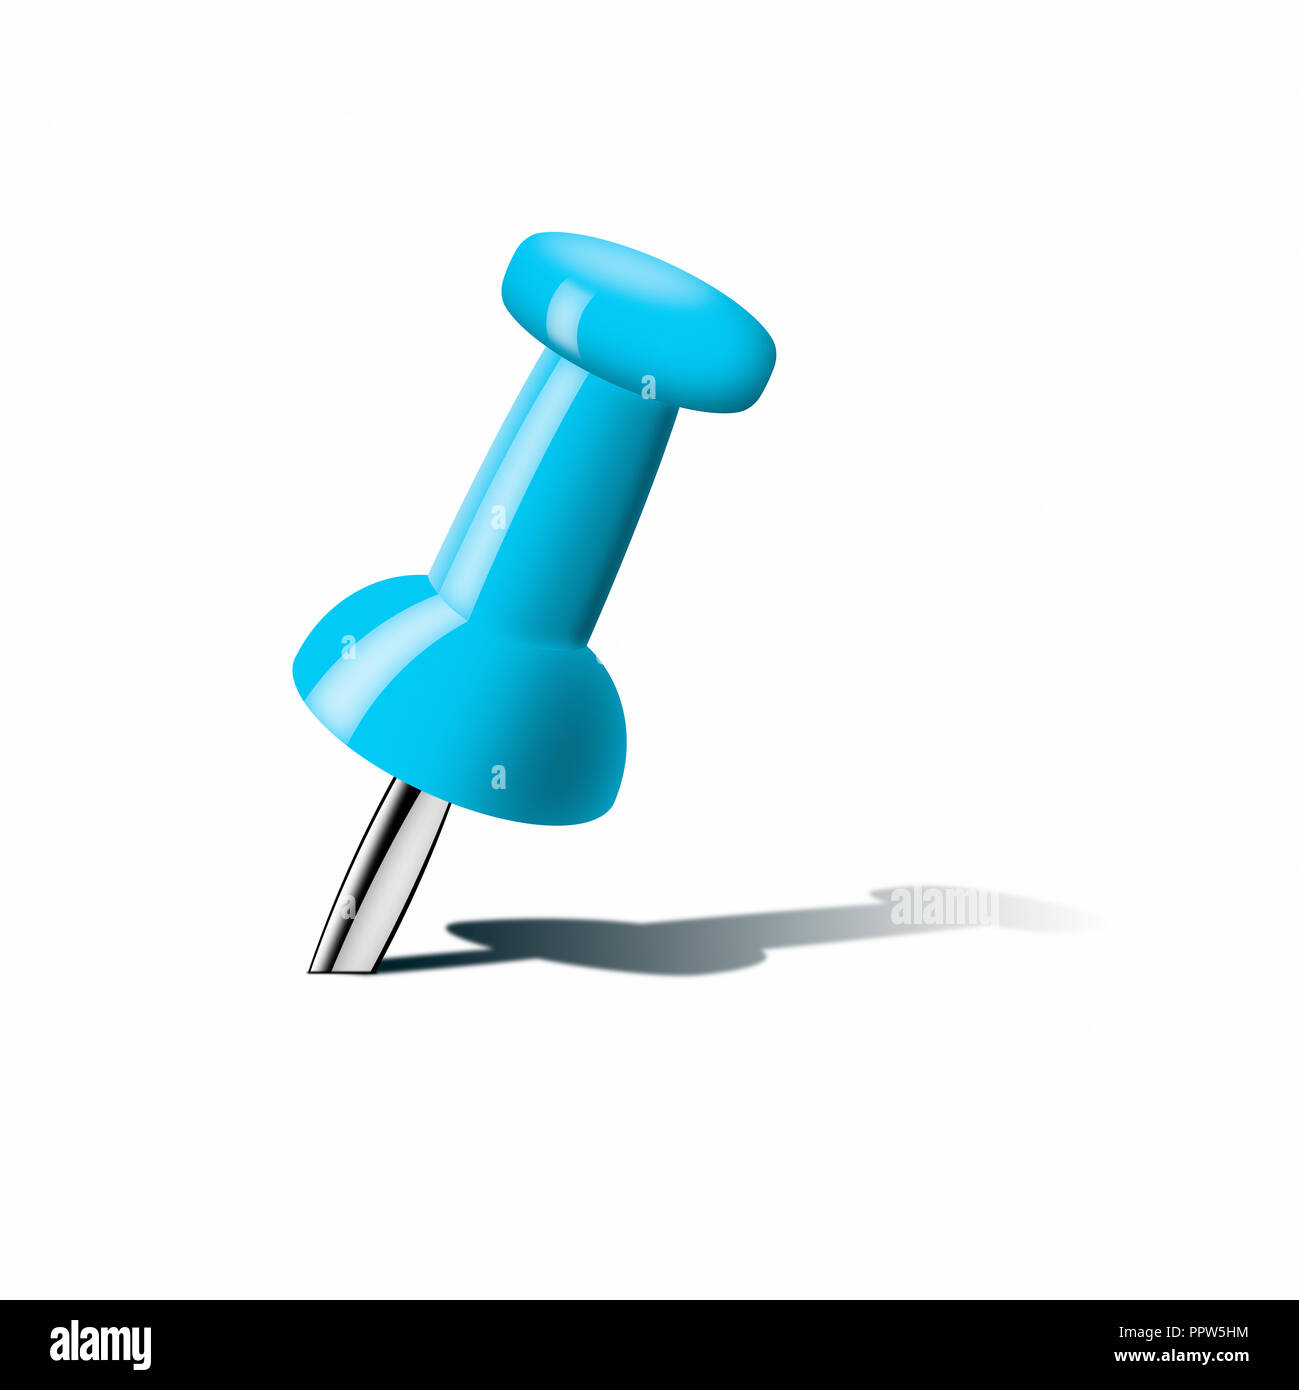 Blue Push Pin on a Background Stock Photo